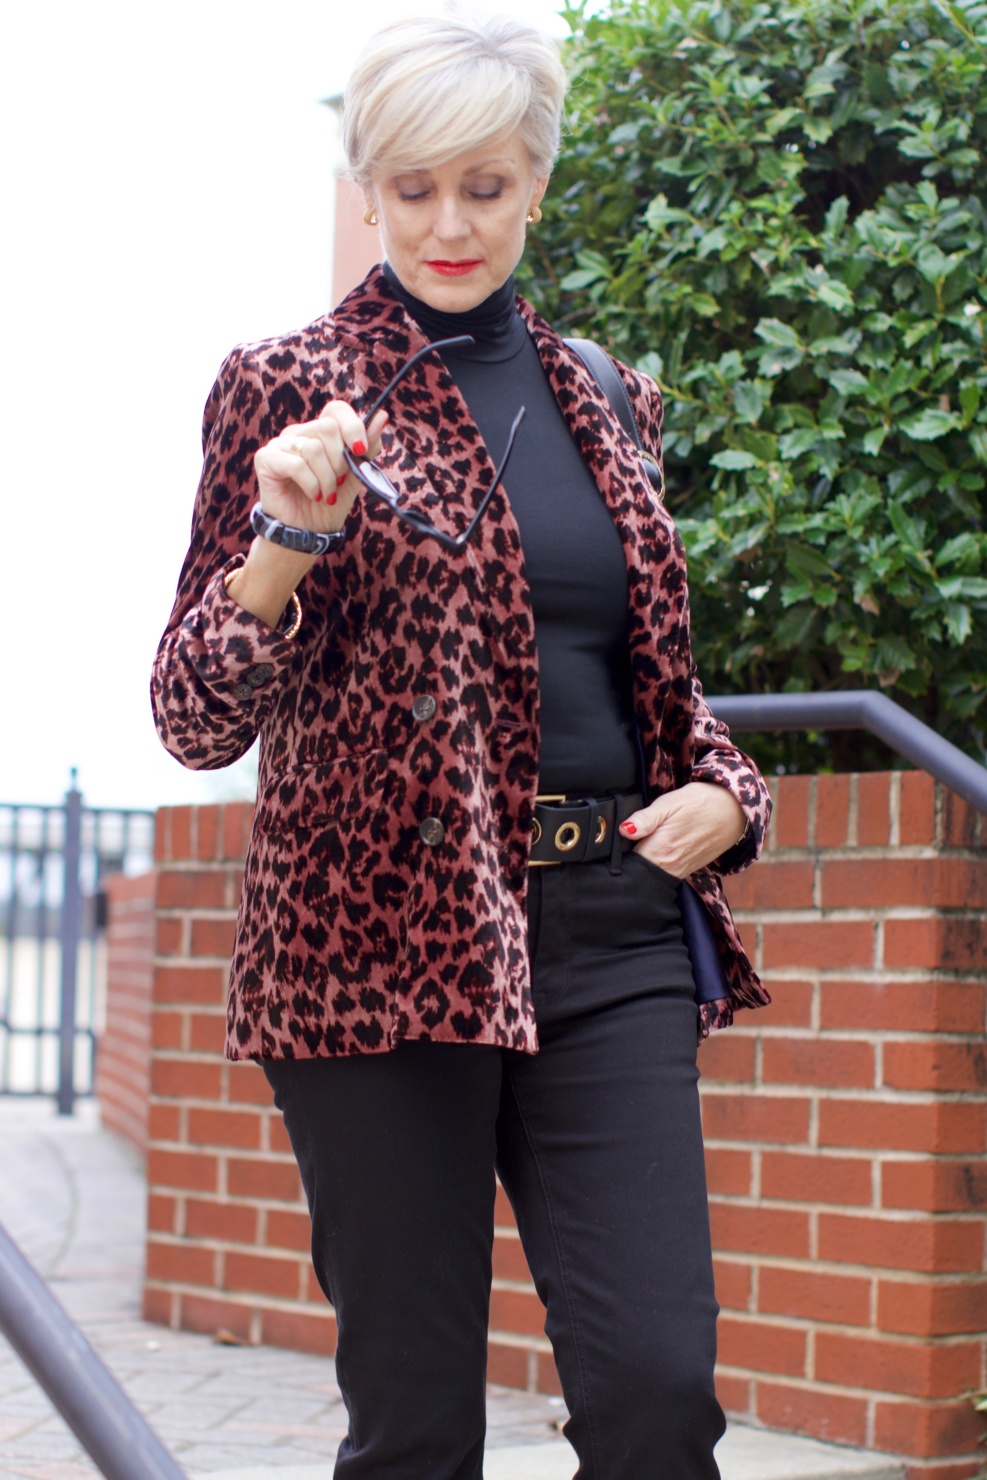 beth at Style at a Certain Age wears a J.Crew leopard blazer, cropped black jeans, Ralph Lauren turtleneck and Gucci dupes